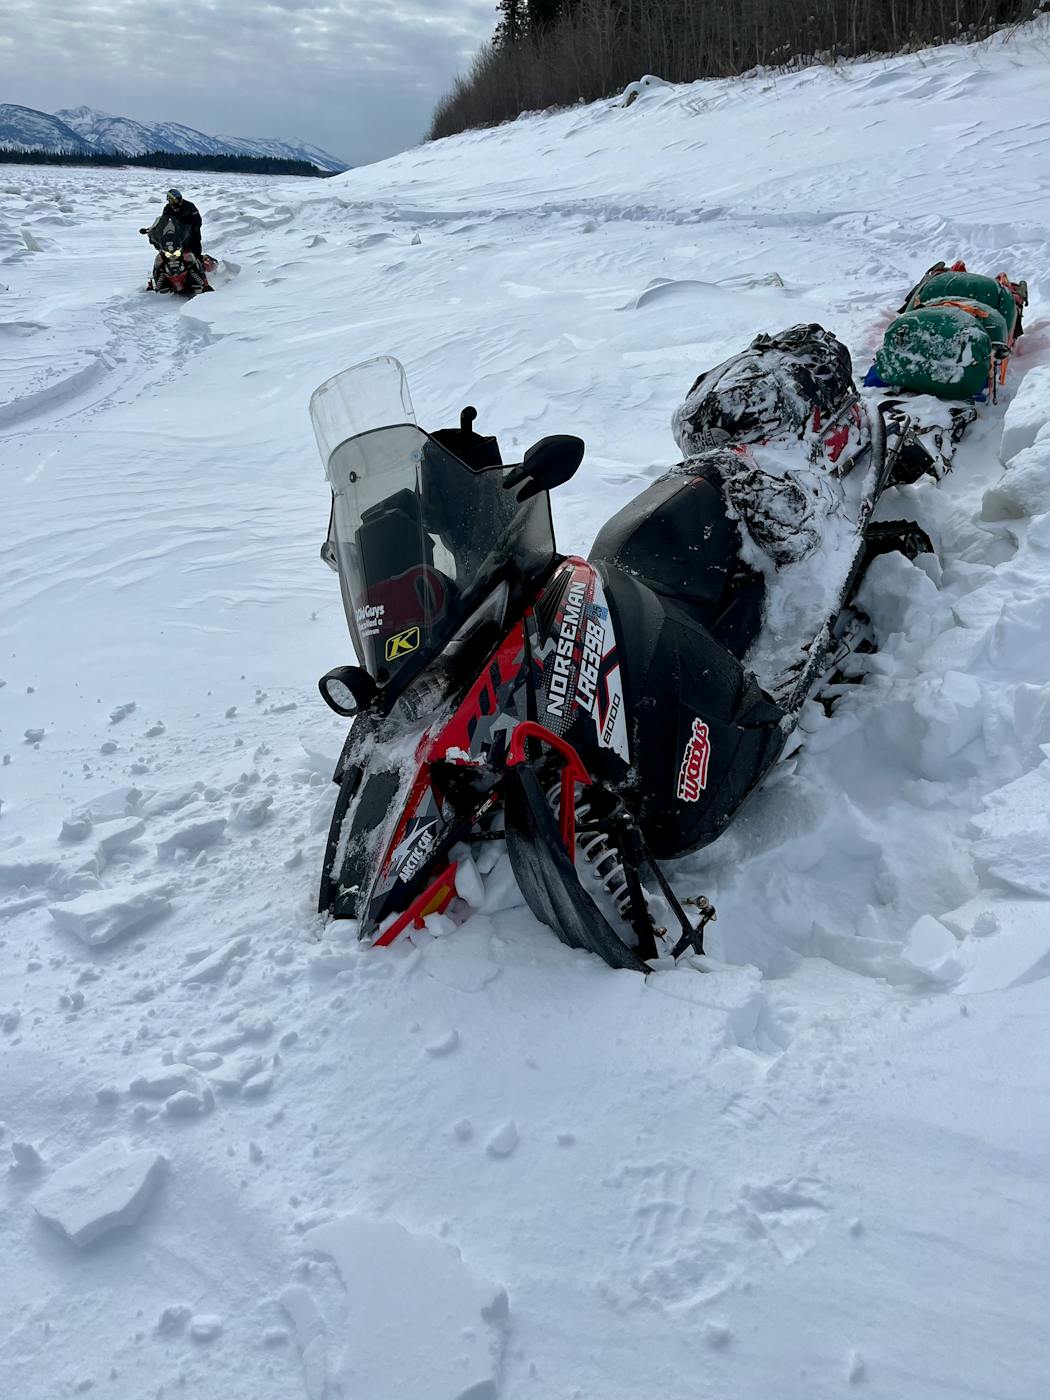 The trek was not an easy one; here one of the snowmobiles was stuck in the deep snow Friday, one of many times the trio found their journey stalled by the conditions.